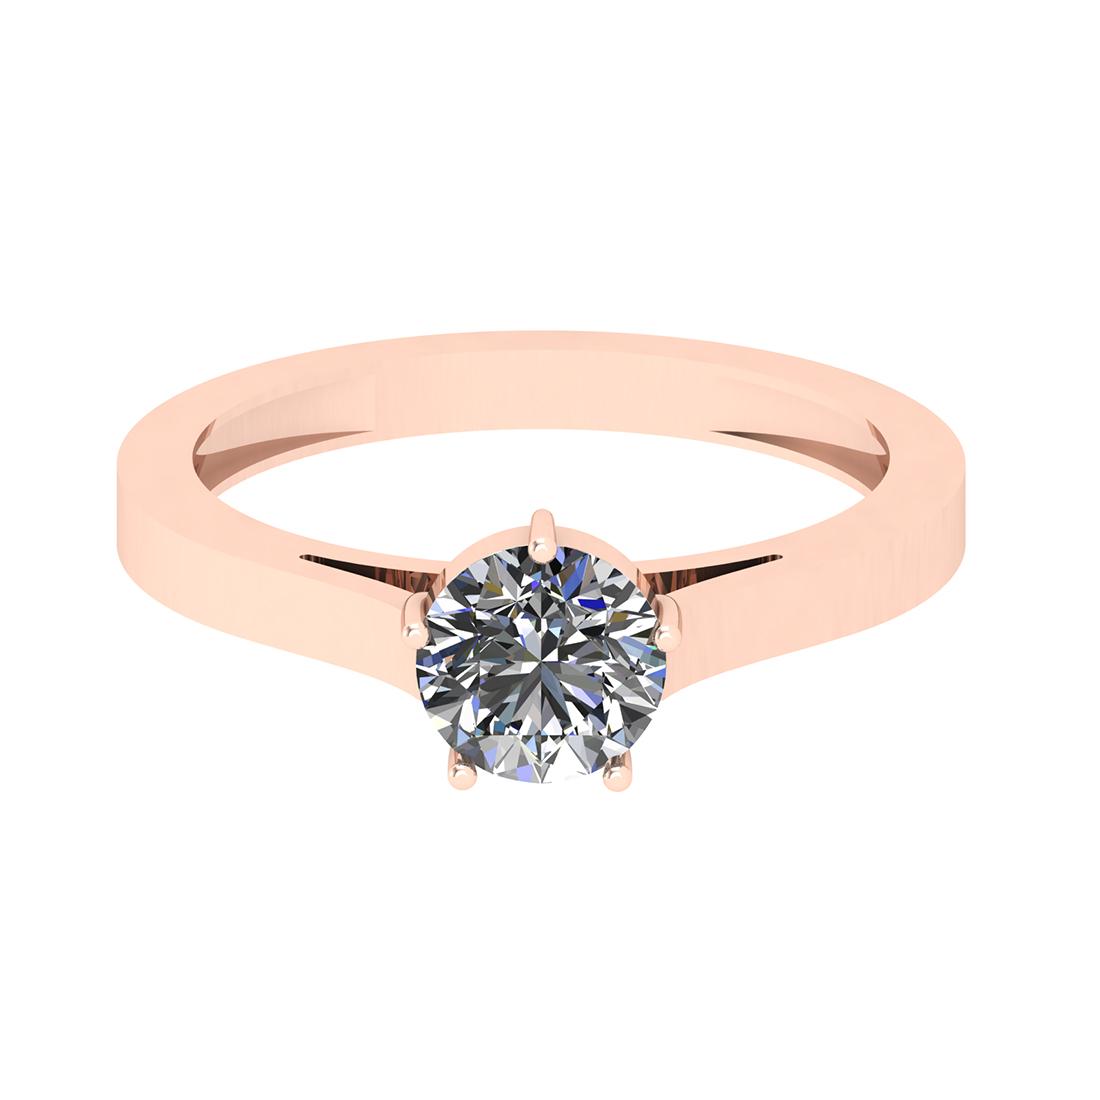 CERTIFIED 0.78 CTW F/VS2 ROUND (LAB GROWN Certified DIAMOND SOLITAIRE RING ) IN 14K YELLOW GOLD